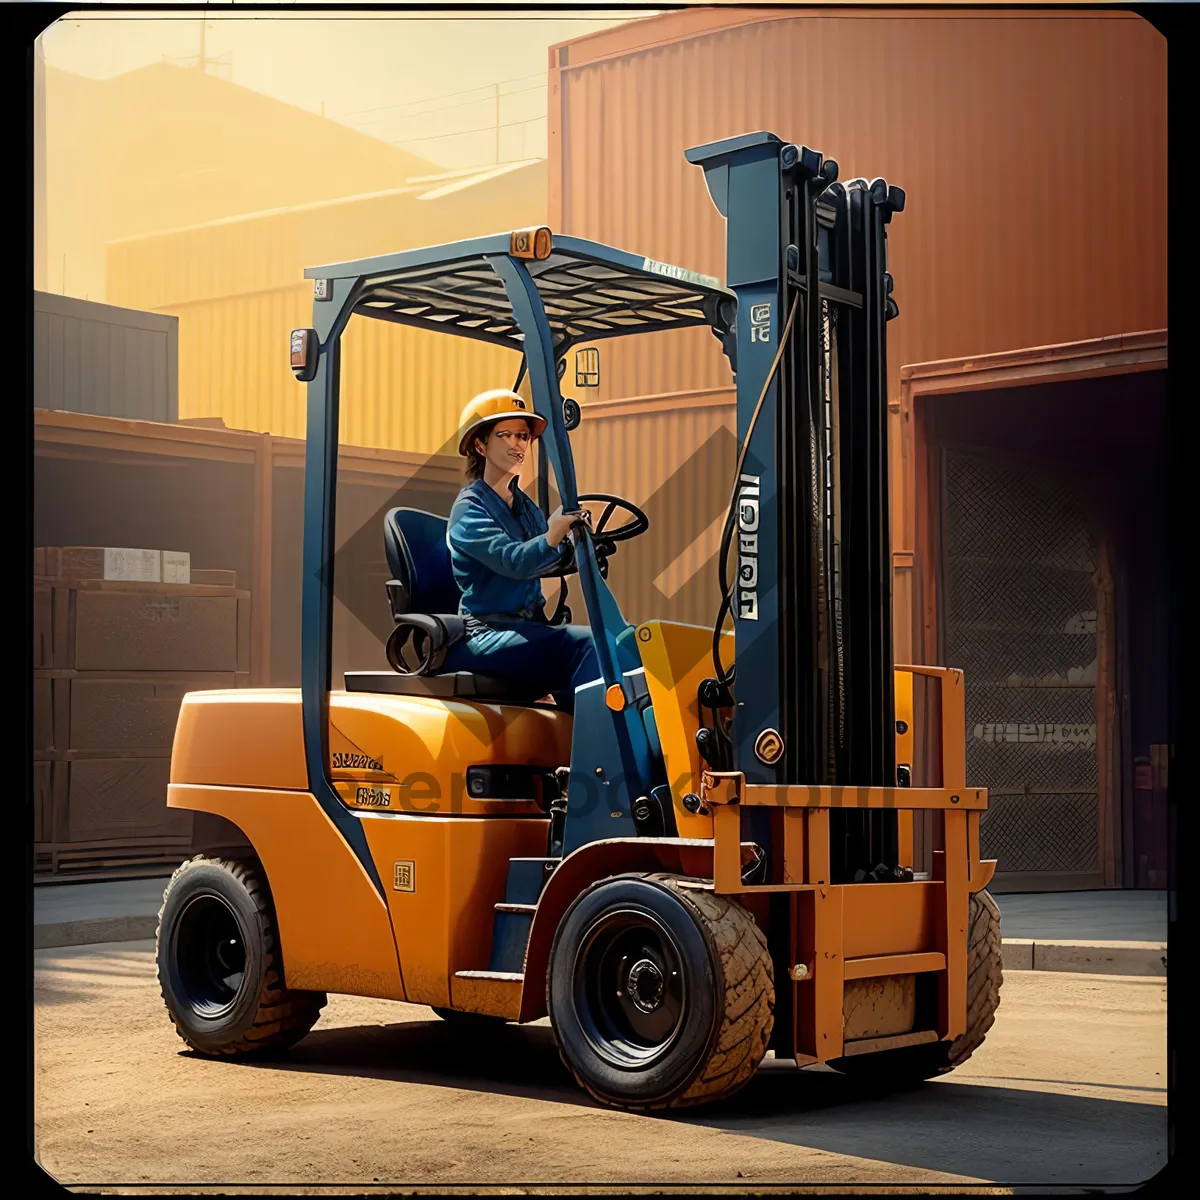 Picture of Industrial Forklift Truck at Warehouse